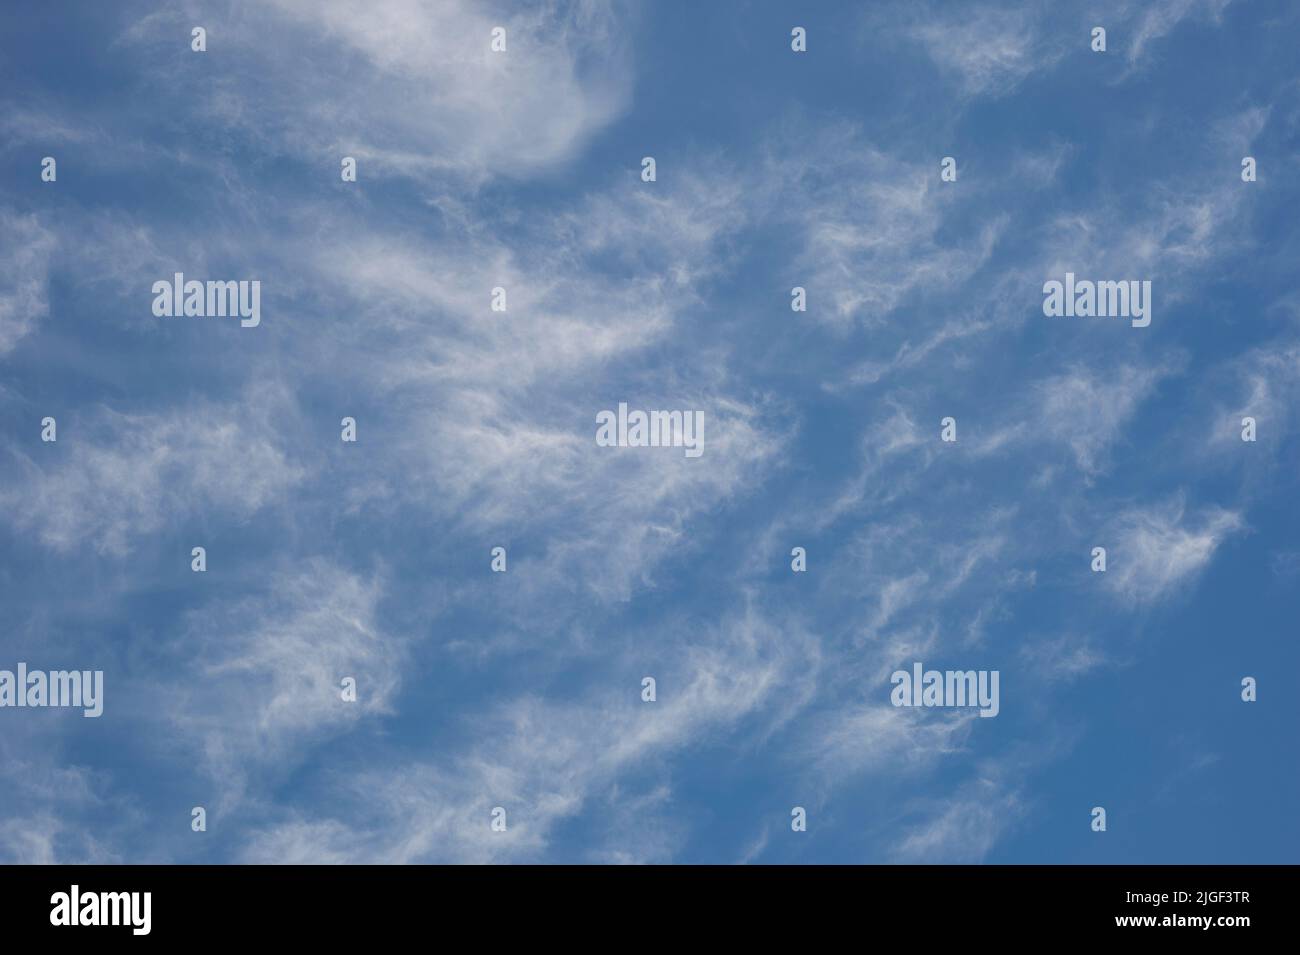 A bright blue sky with white wispy clouds Stock Photo